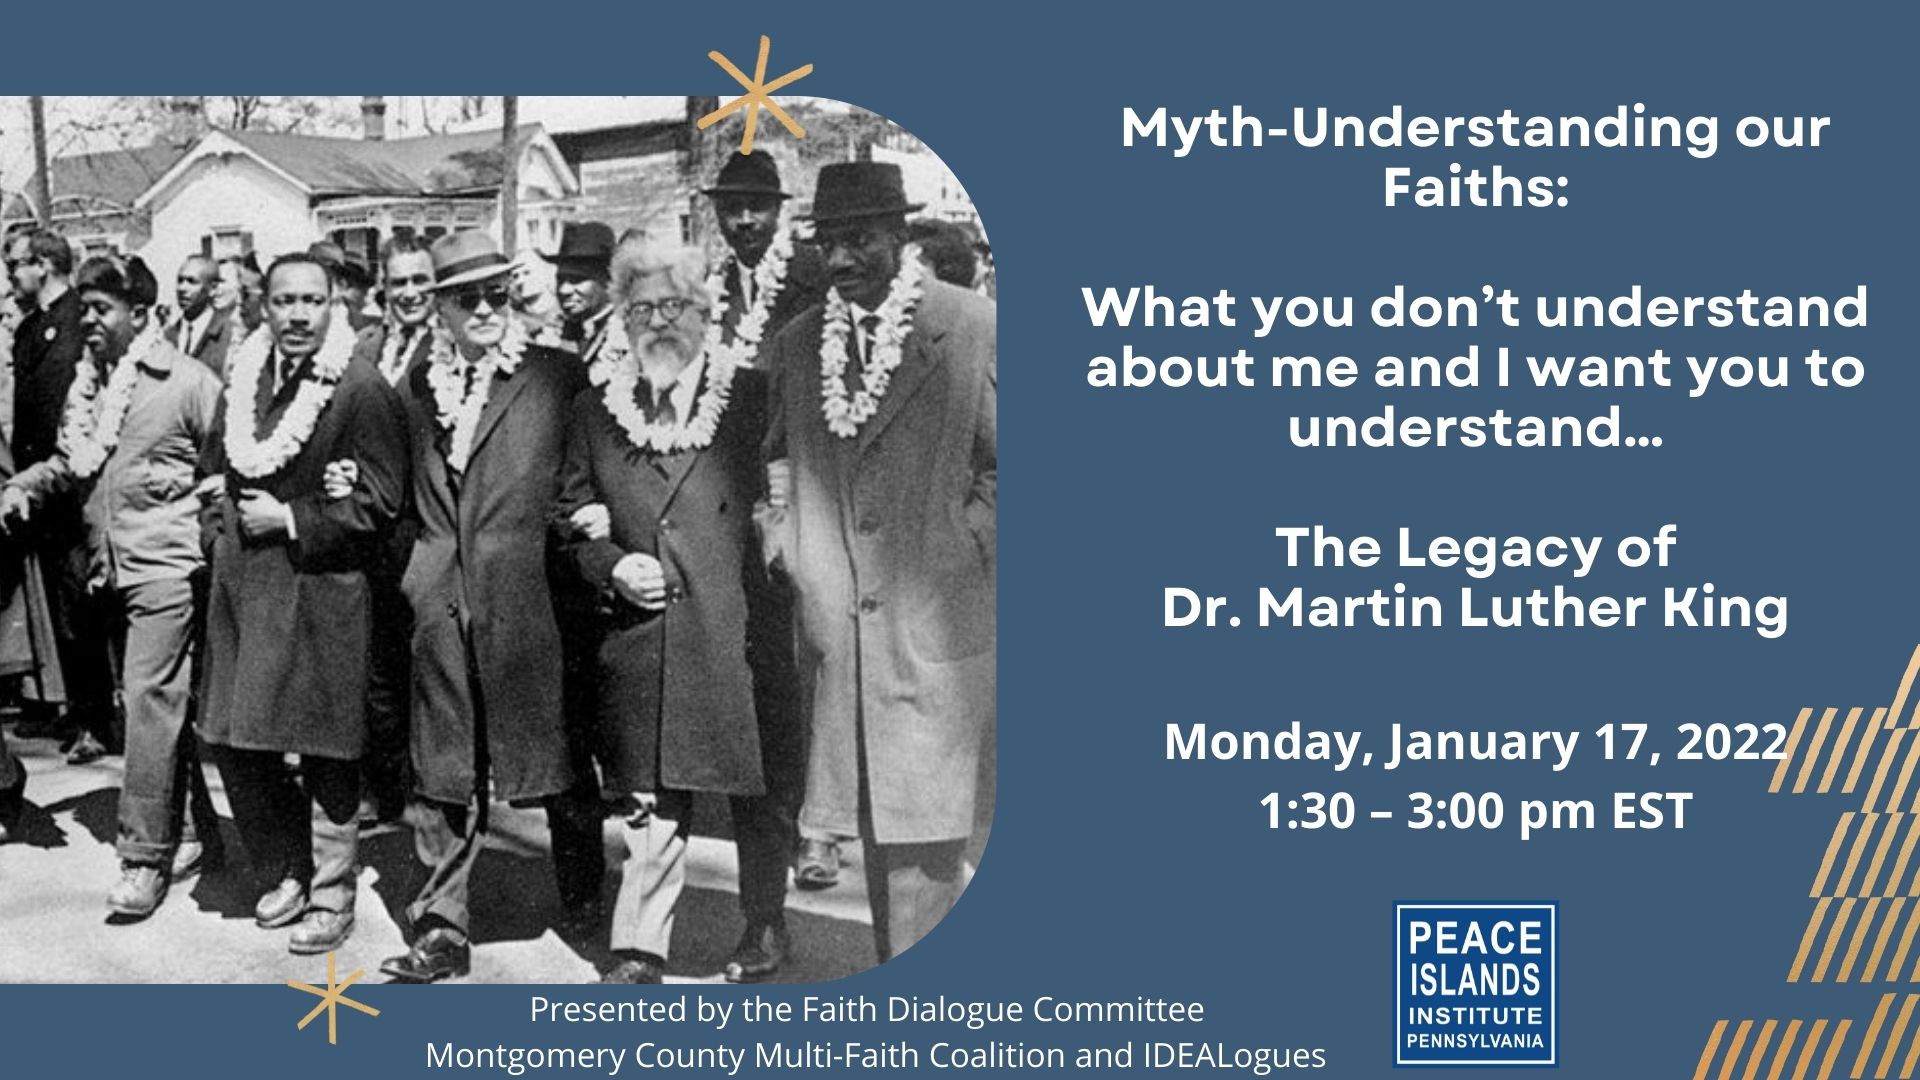 Myth-Understanding our Faiths – The Legacy of Dr. Martin Luther King